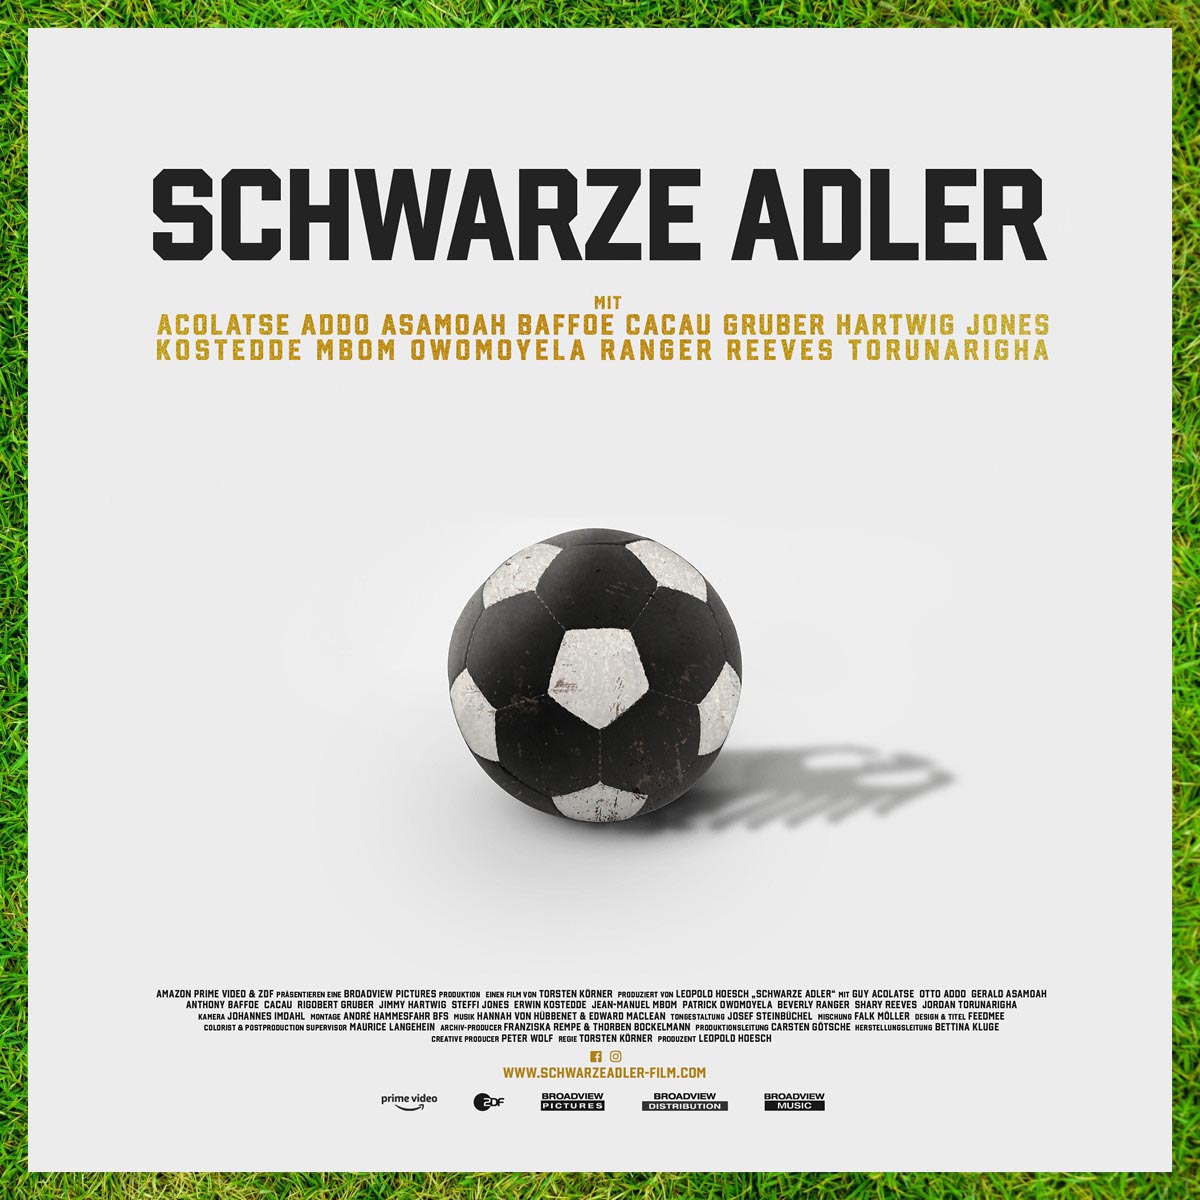 Film poster of Schwarze Adler, showing a black and white football in the middle, casting the shadow of the German eagle. Around the picture is a square green thin frame showing green grass.